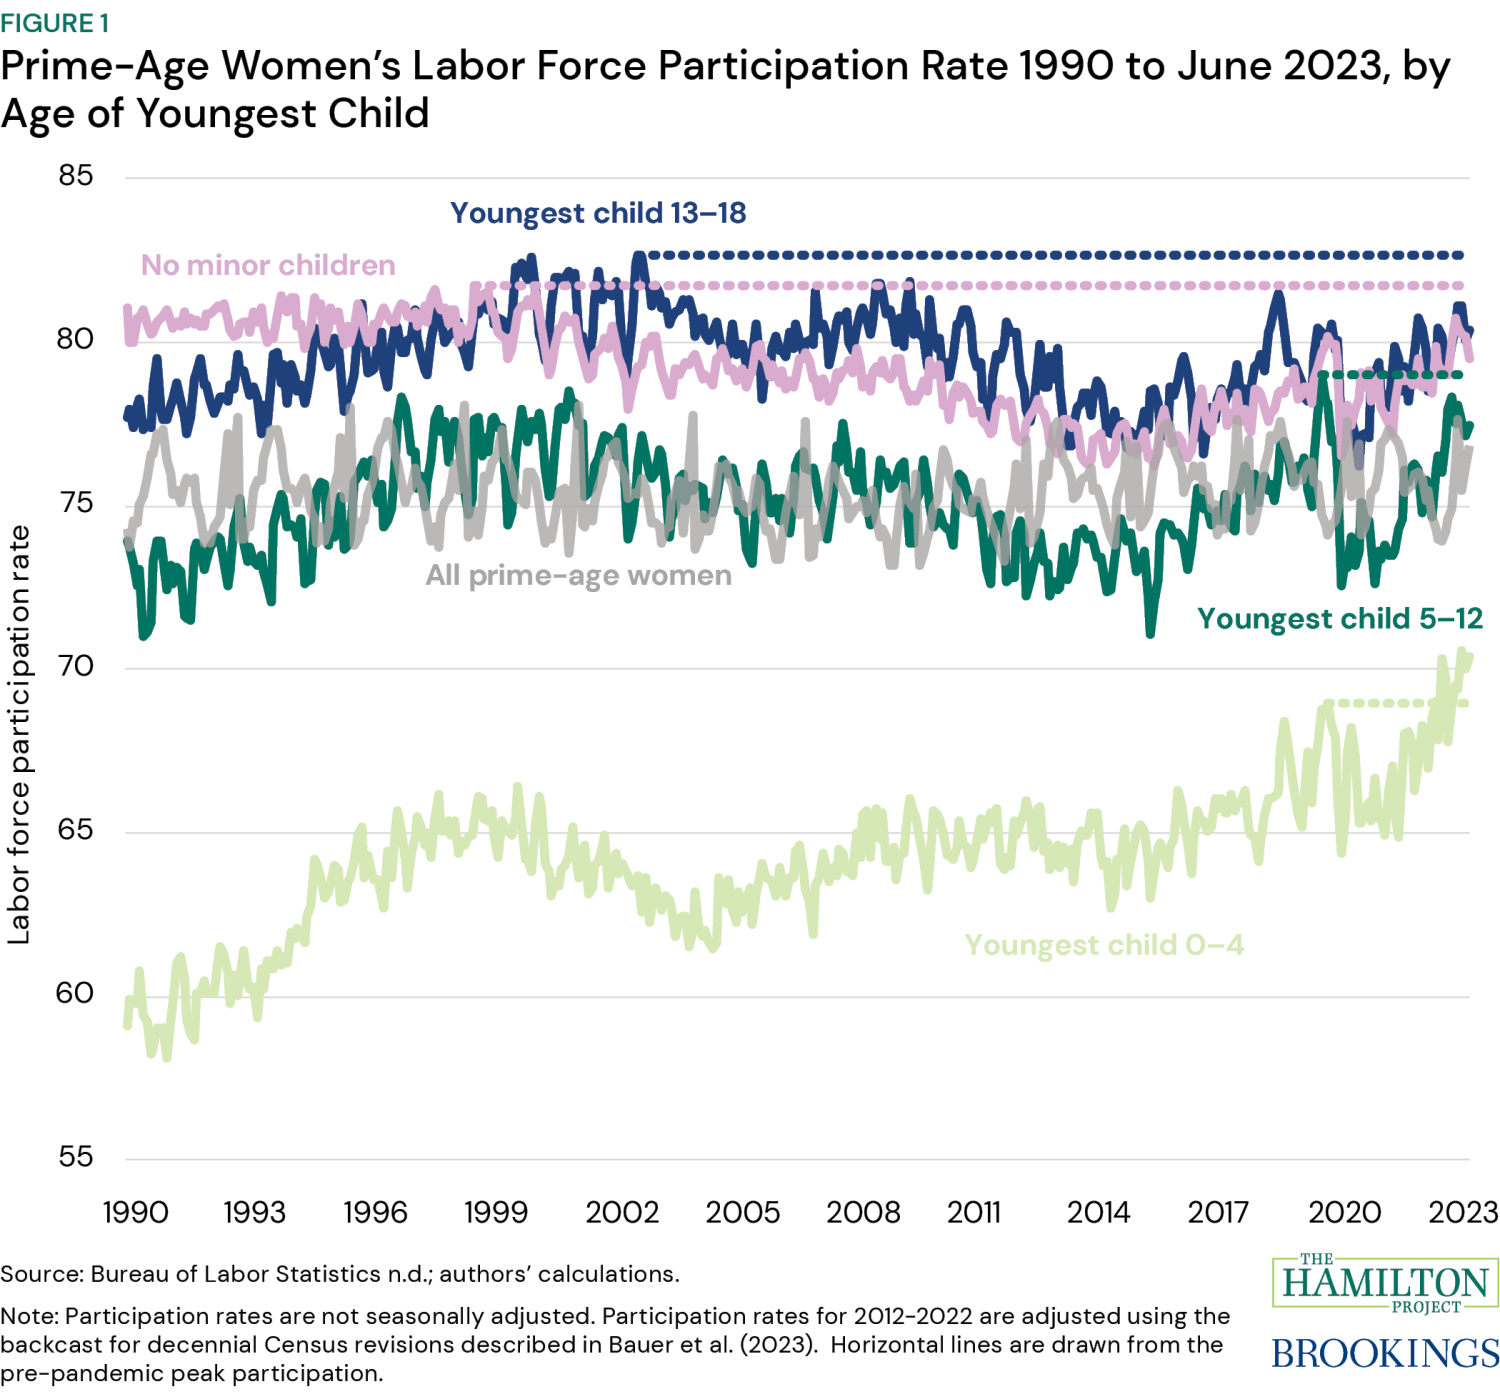 Figure 1. Prime-Age Women’s Labor Force Participation Rate 1990 tO June 2023, by Age of Youngest Child at Home